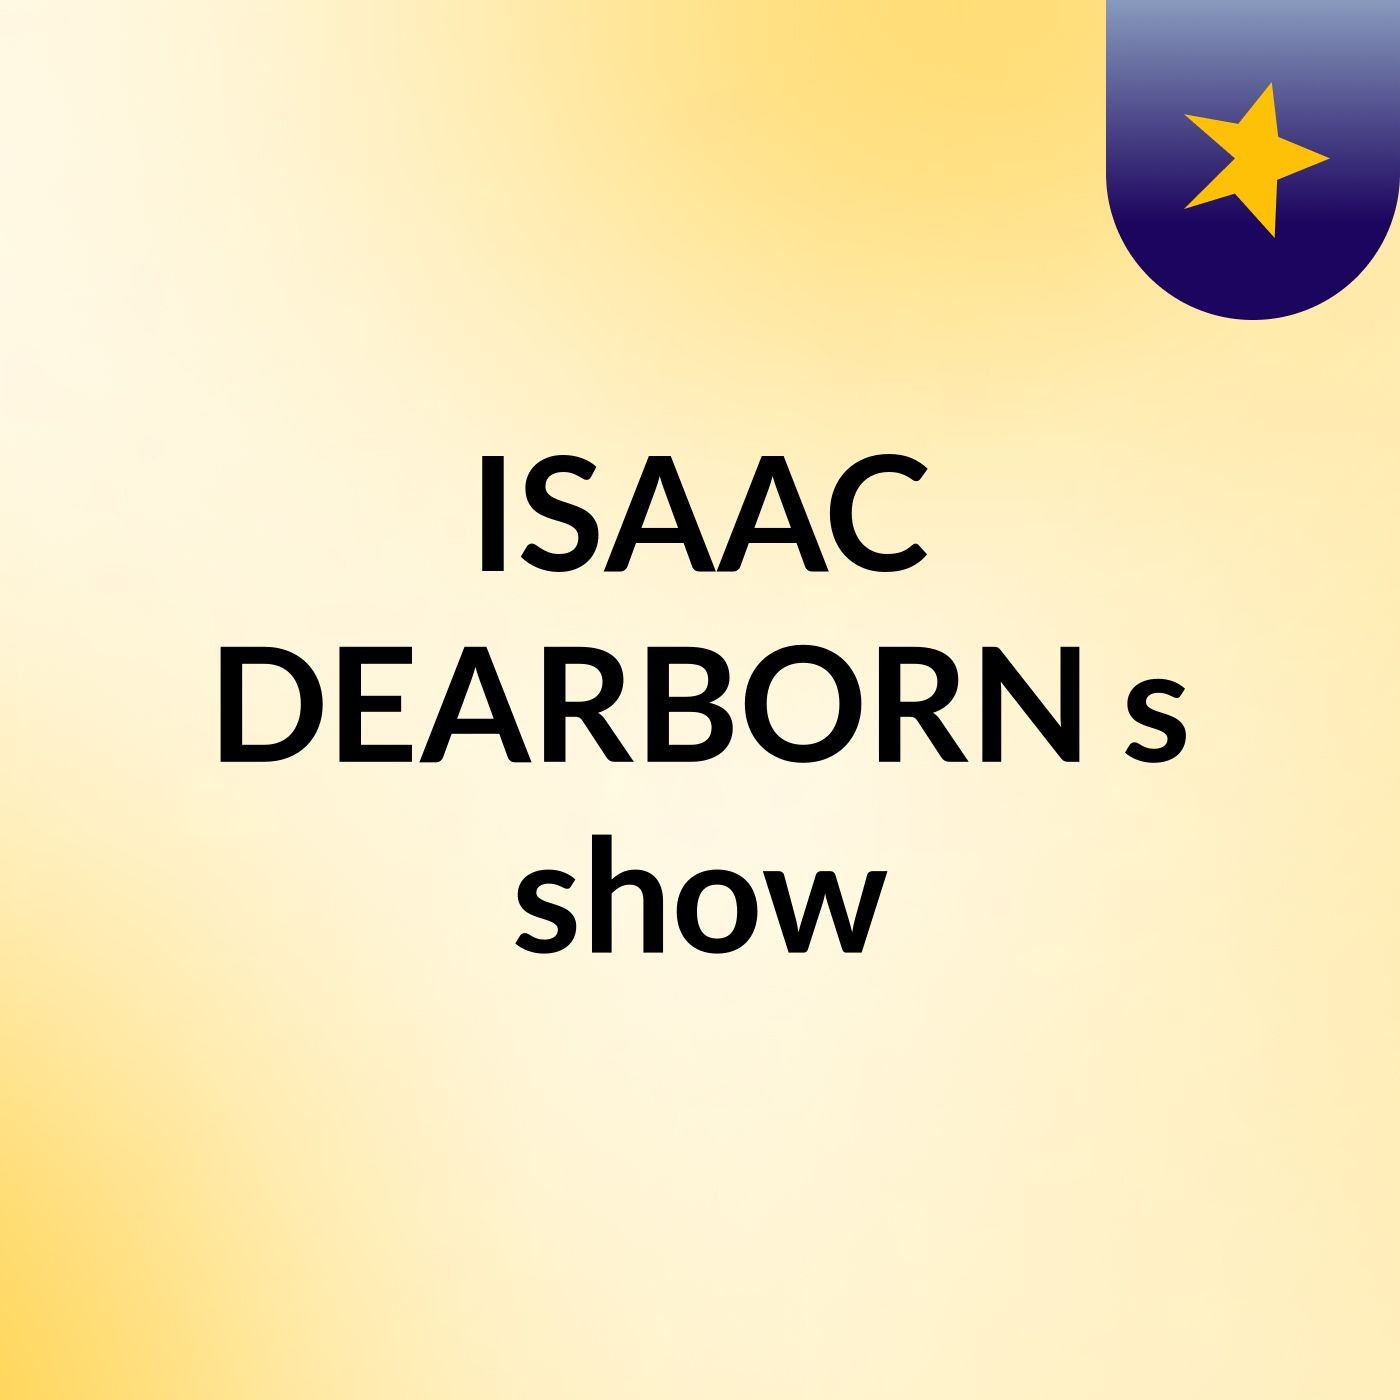 ISAAC DEARBORN's show